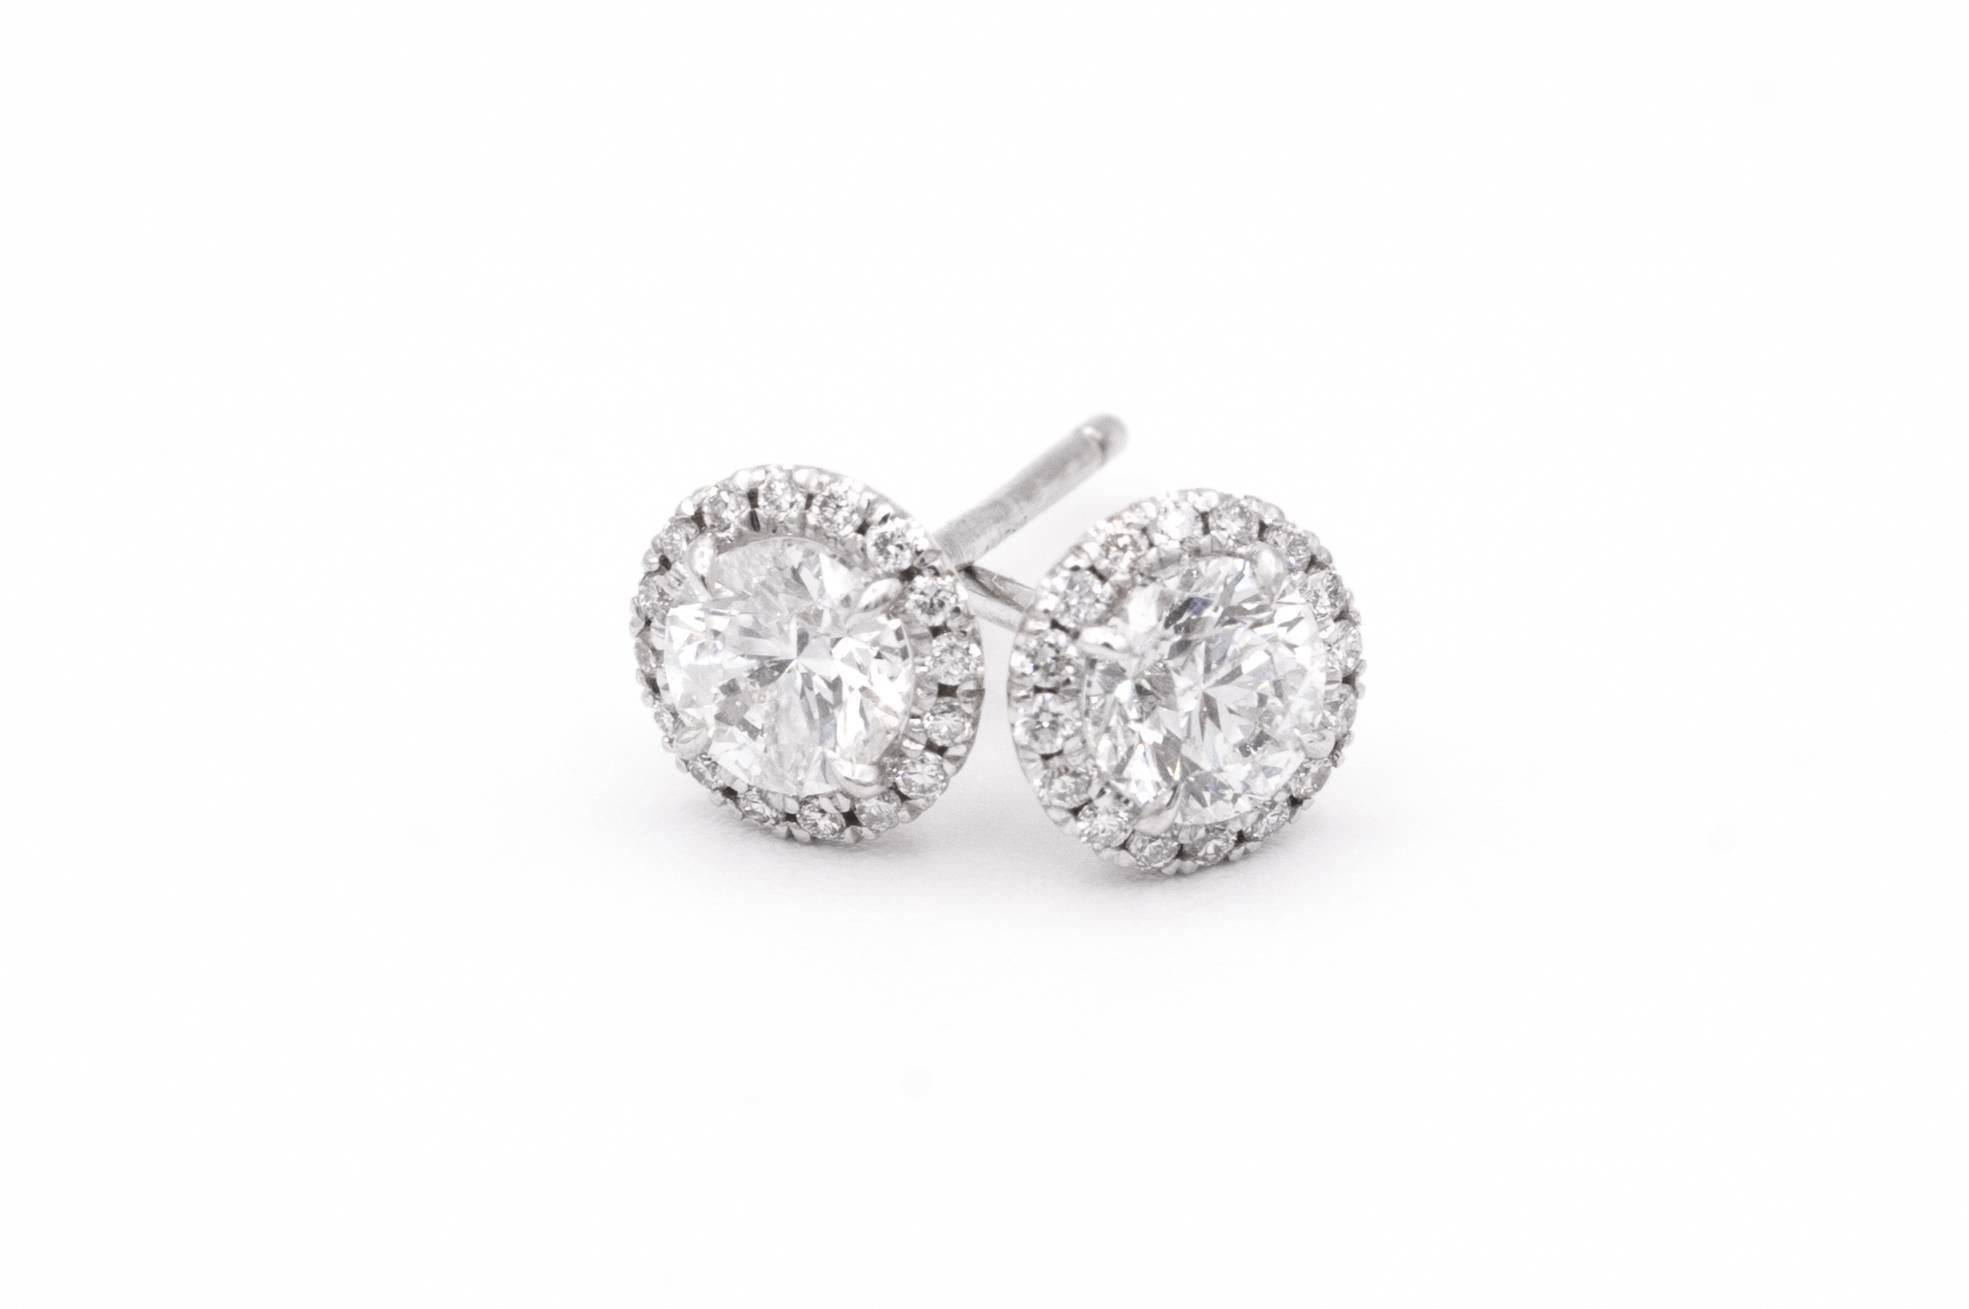 1.00 Carat Diamond Halo Stud earrings in 14K White Gold
Center Diamonds are .85 carats total , F color, SI2 clarity
Surrounded by 32 diamonds weighing an additional .15 cts. 
Total diamonds weight is 1.00 cts 
Has the look of 1 carat each diamonds
